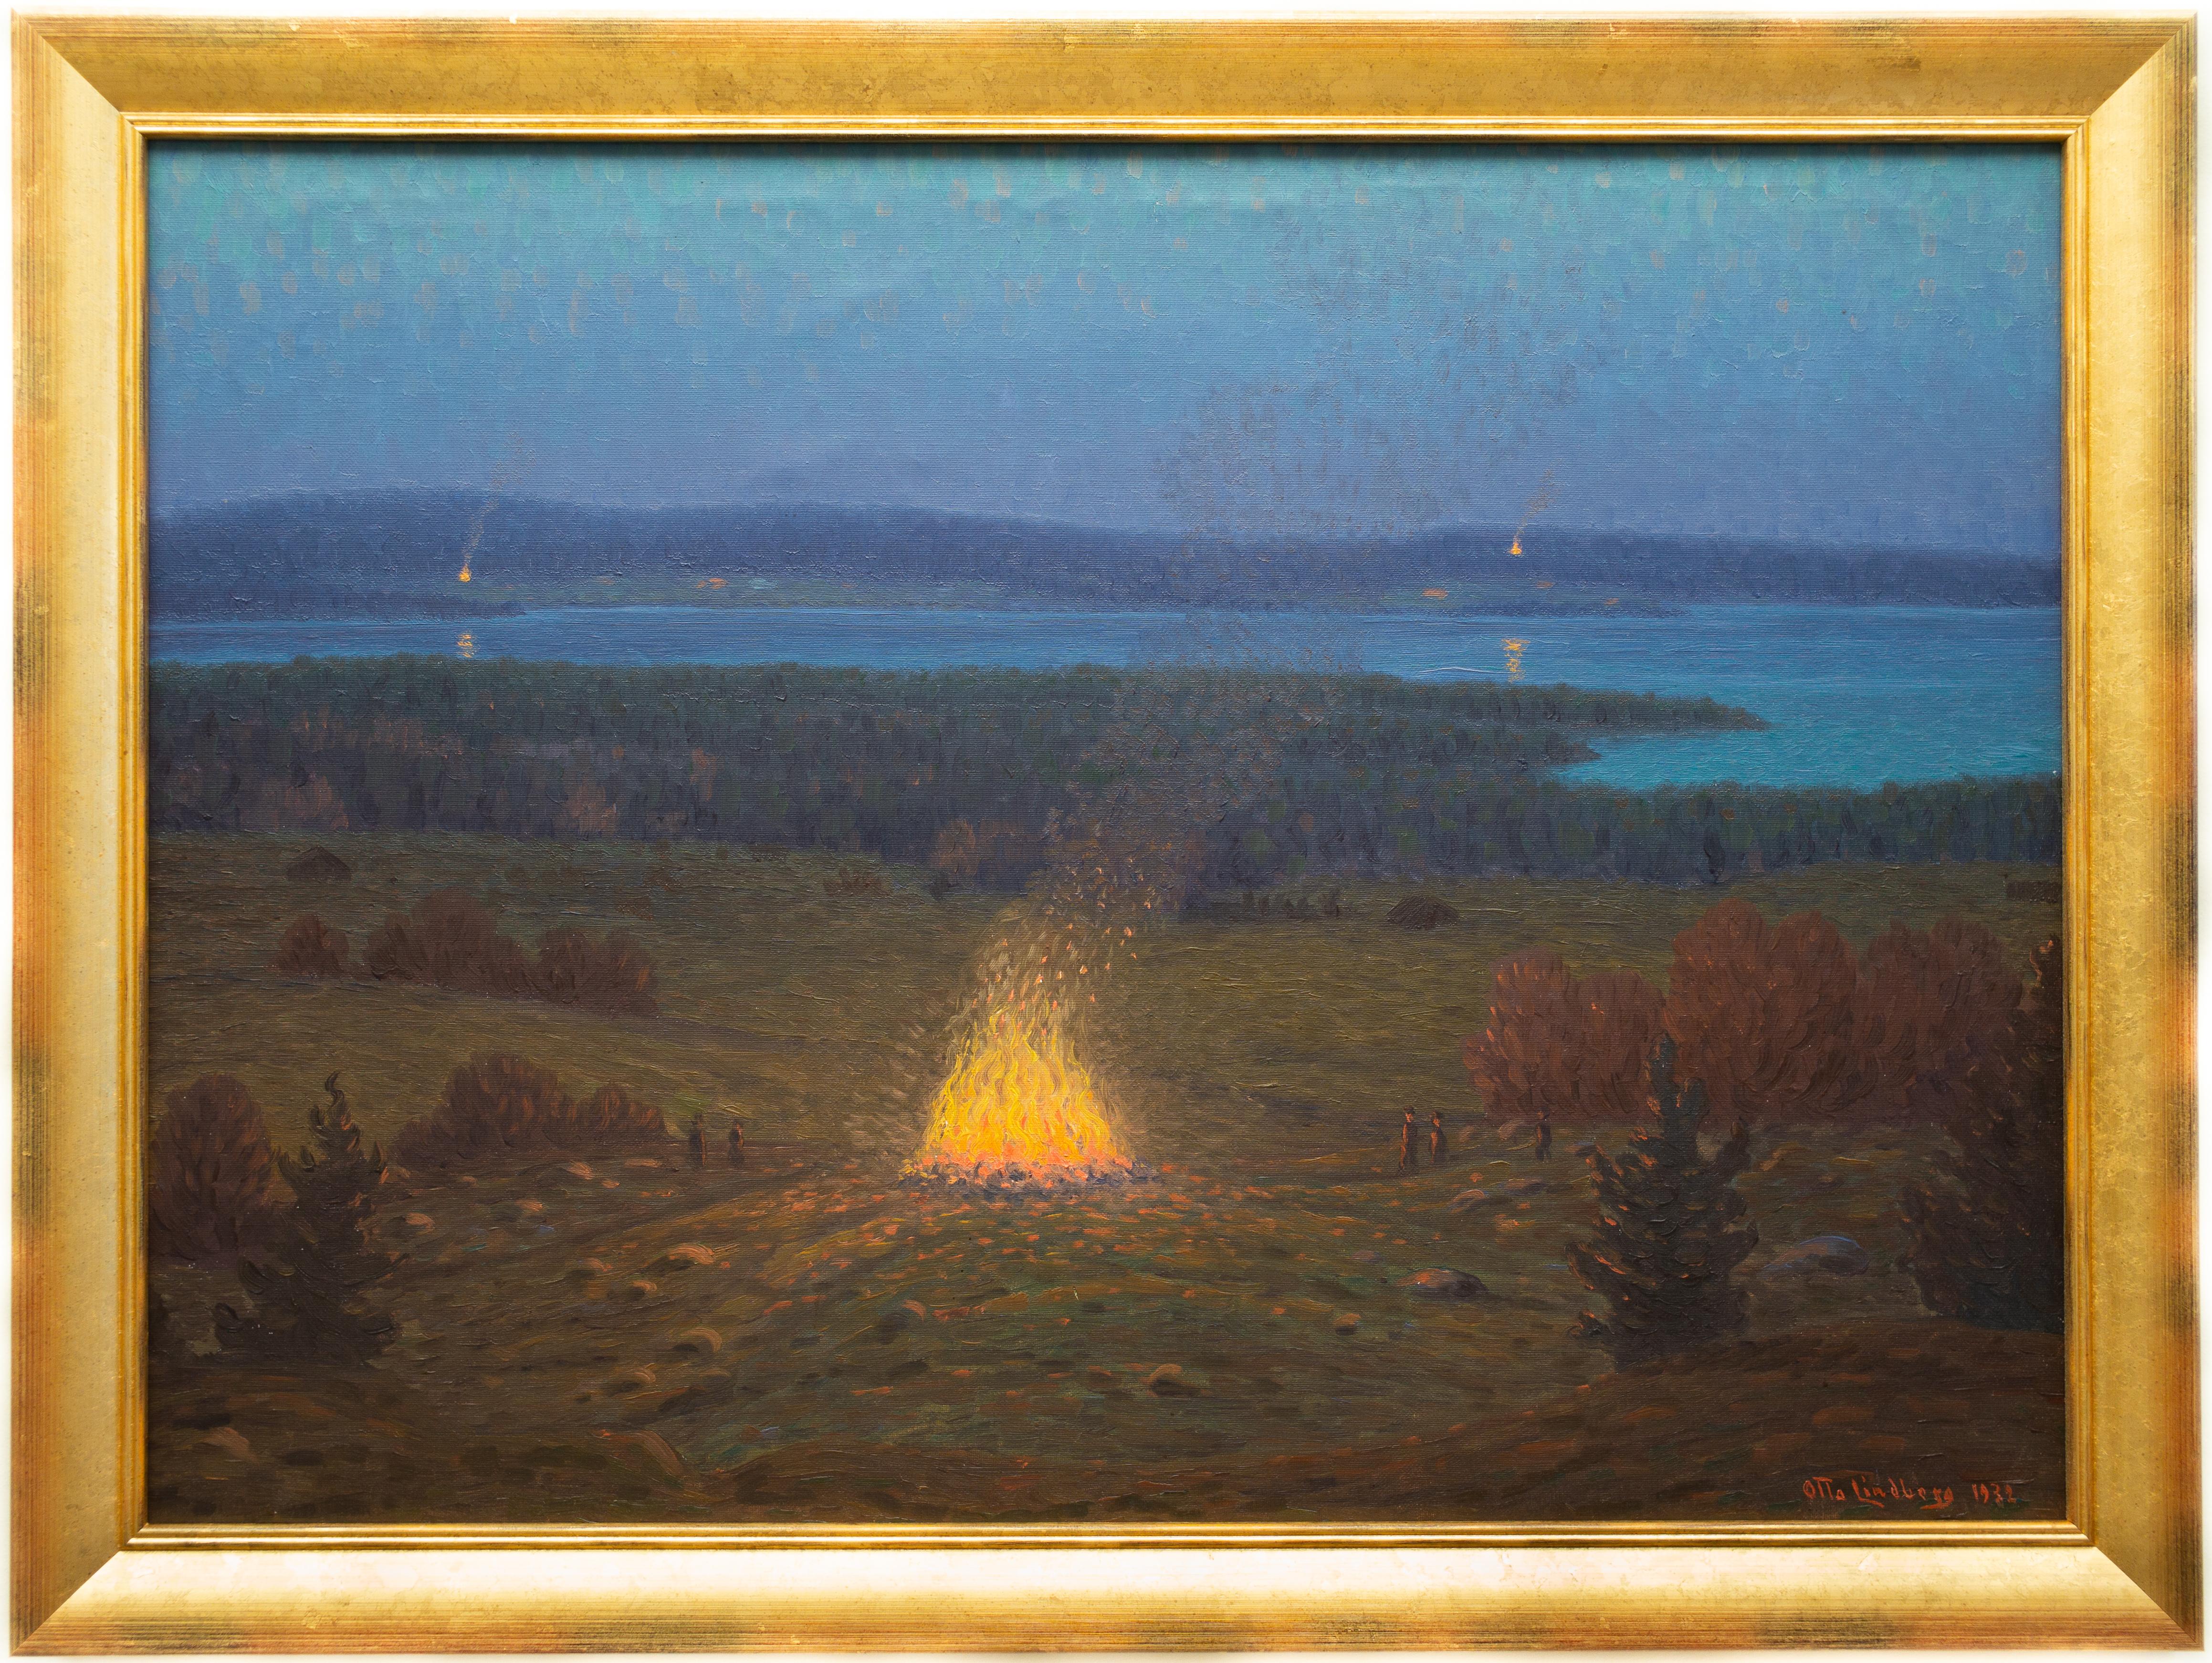 Otto Lindberg was a Swedish artist born in 1880 in Söderhamn.
The driving force in Lindberg's paintings was the fascination for Scandinavian nature, the four seasons with colourful landscapes and gorgeous sunsets. 
Walpurgis Night is a traditional